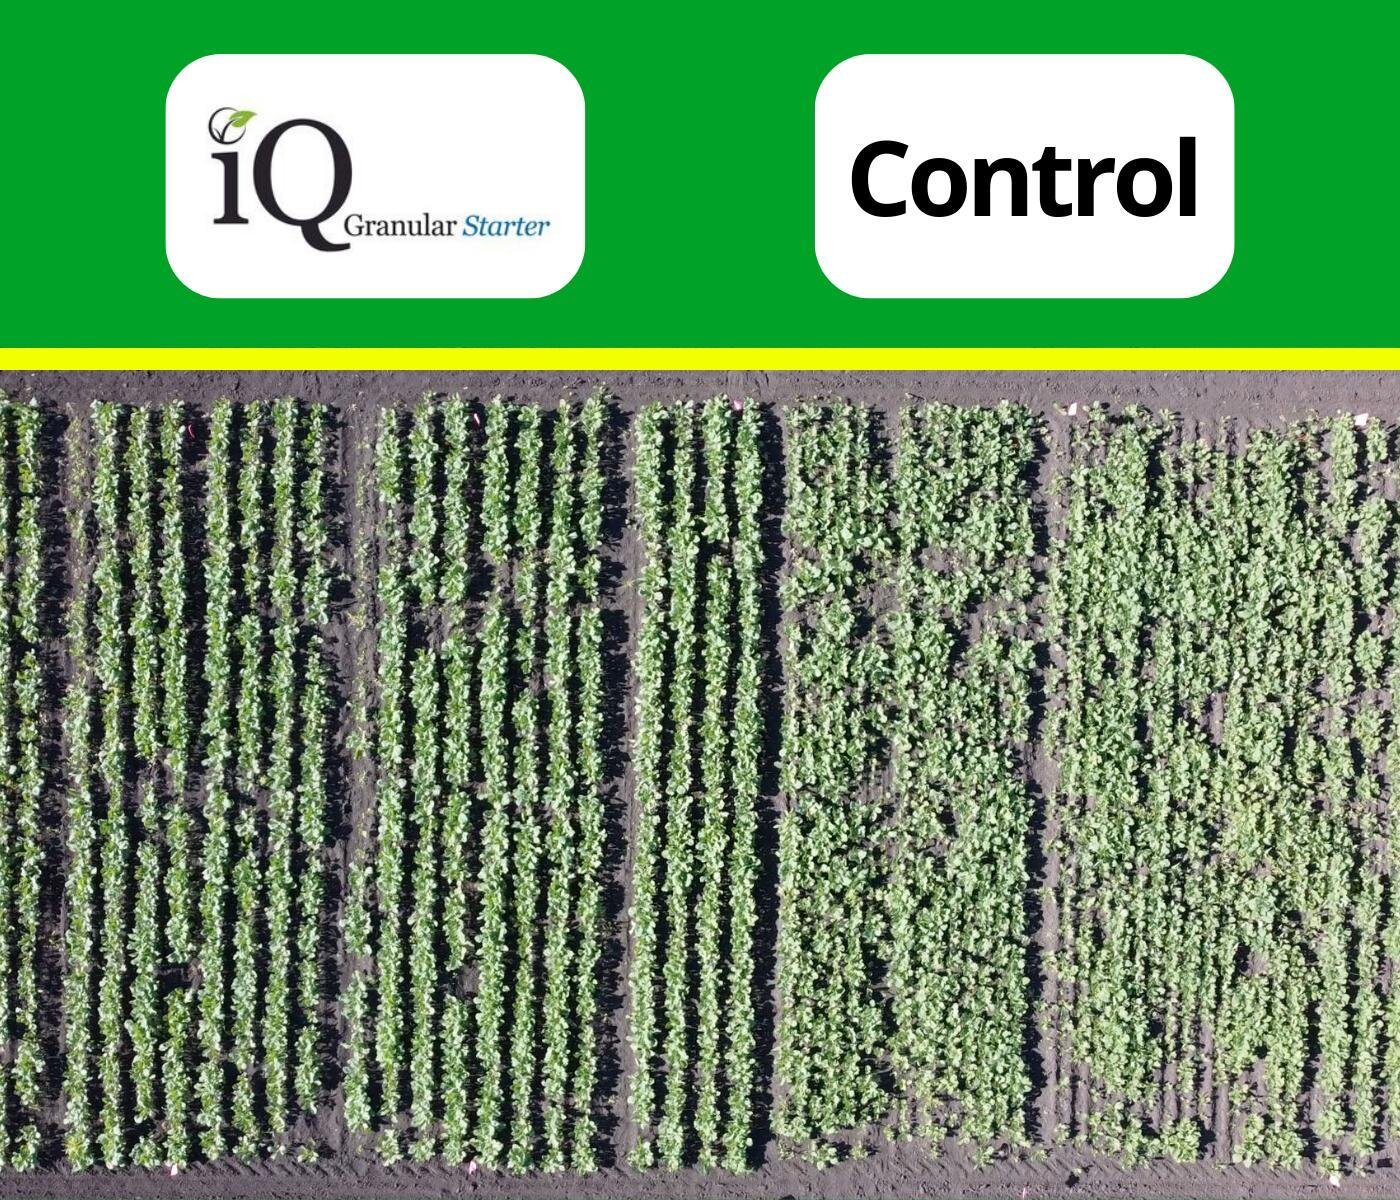 Sometimes a birds-eye-view is the best way to see the impact on a trial! 🦅👀

This field was planted using iQ Granular Starter on the left. It uses the best raw materials available and the result is a powerful fertilizer that feeds both the soil AND